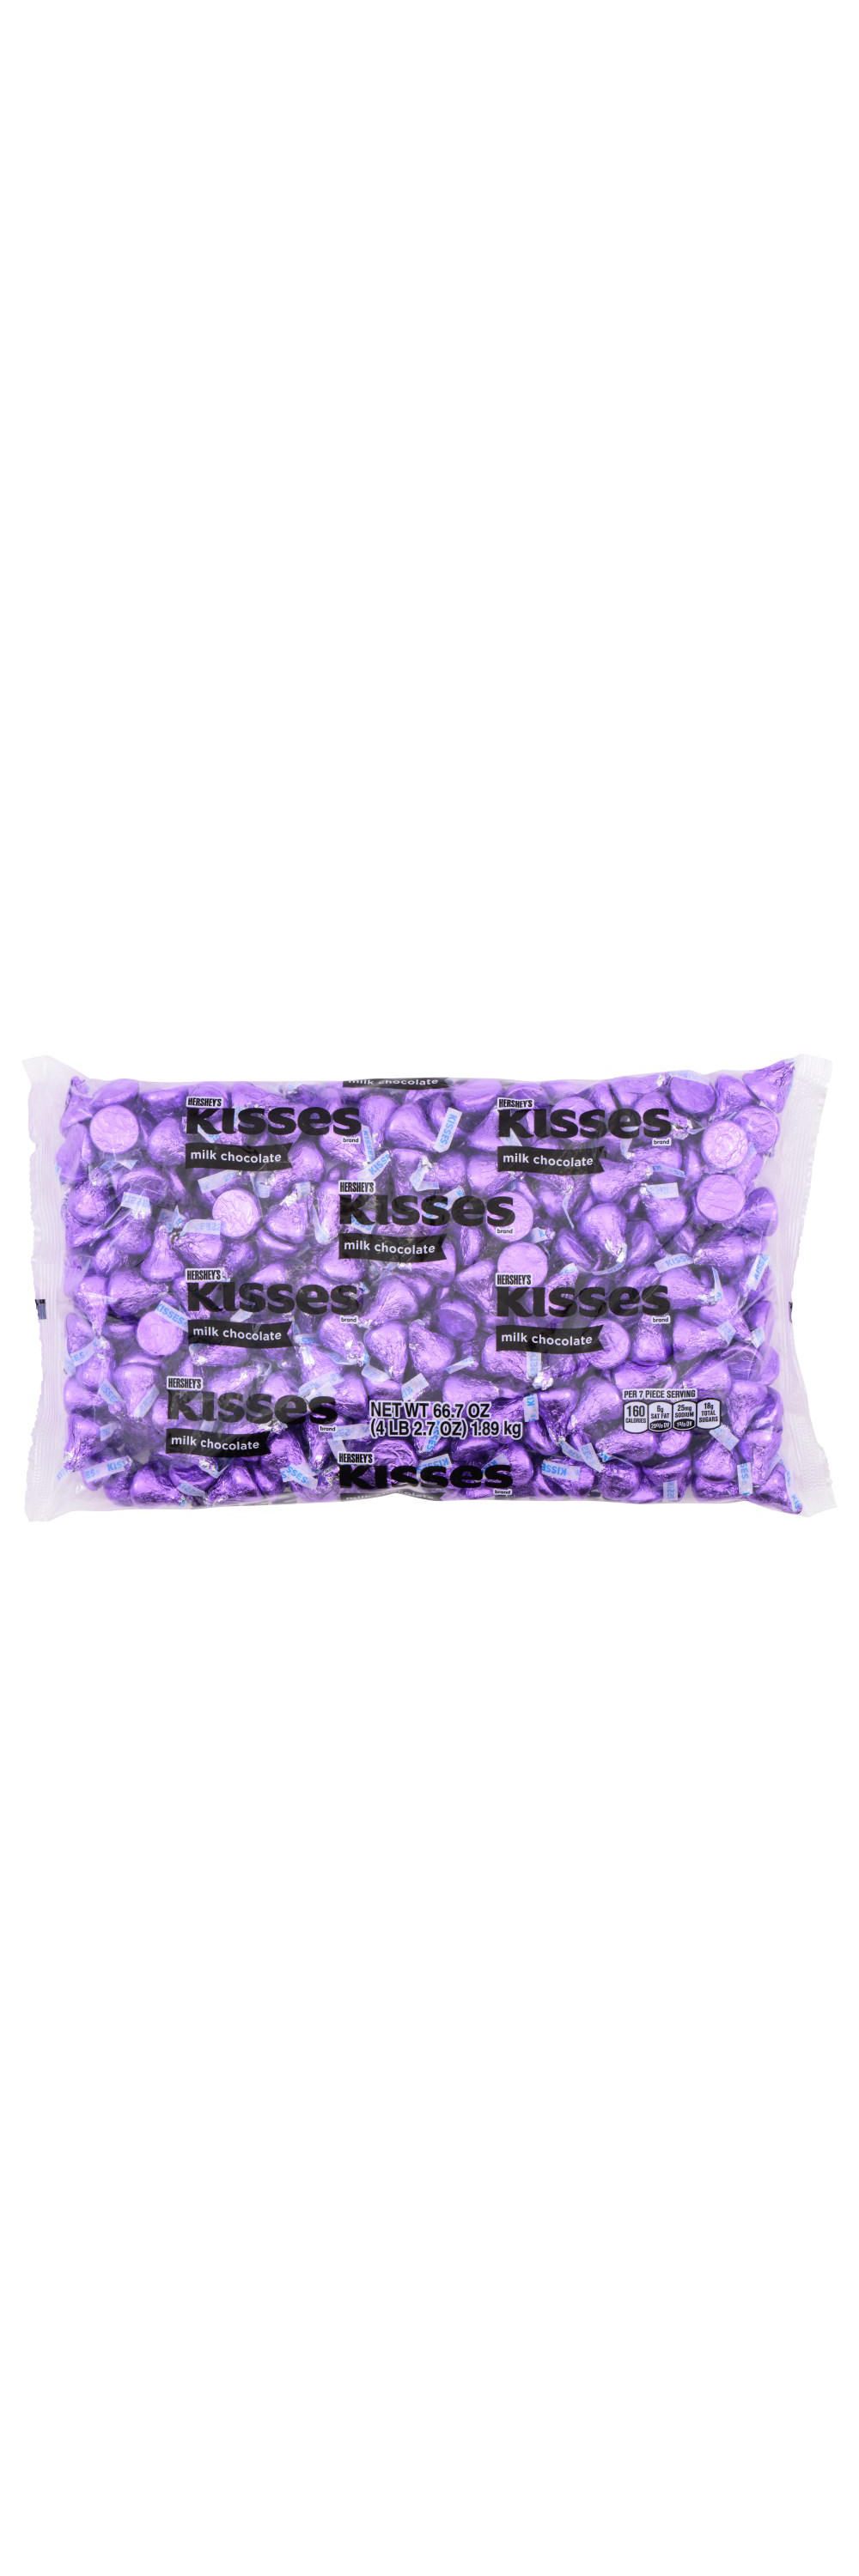 HERSHEY'S KISSES Purple Foil Milk Chocolate Candy, 66.7 oz bag - Front of Package